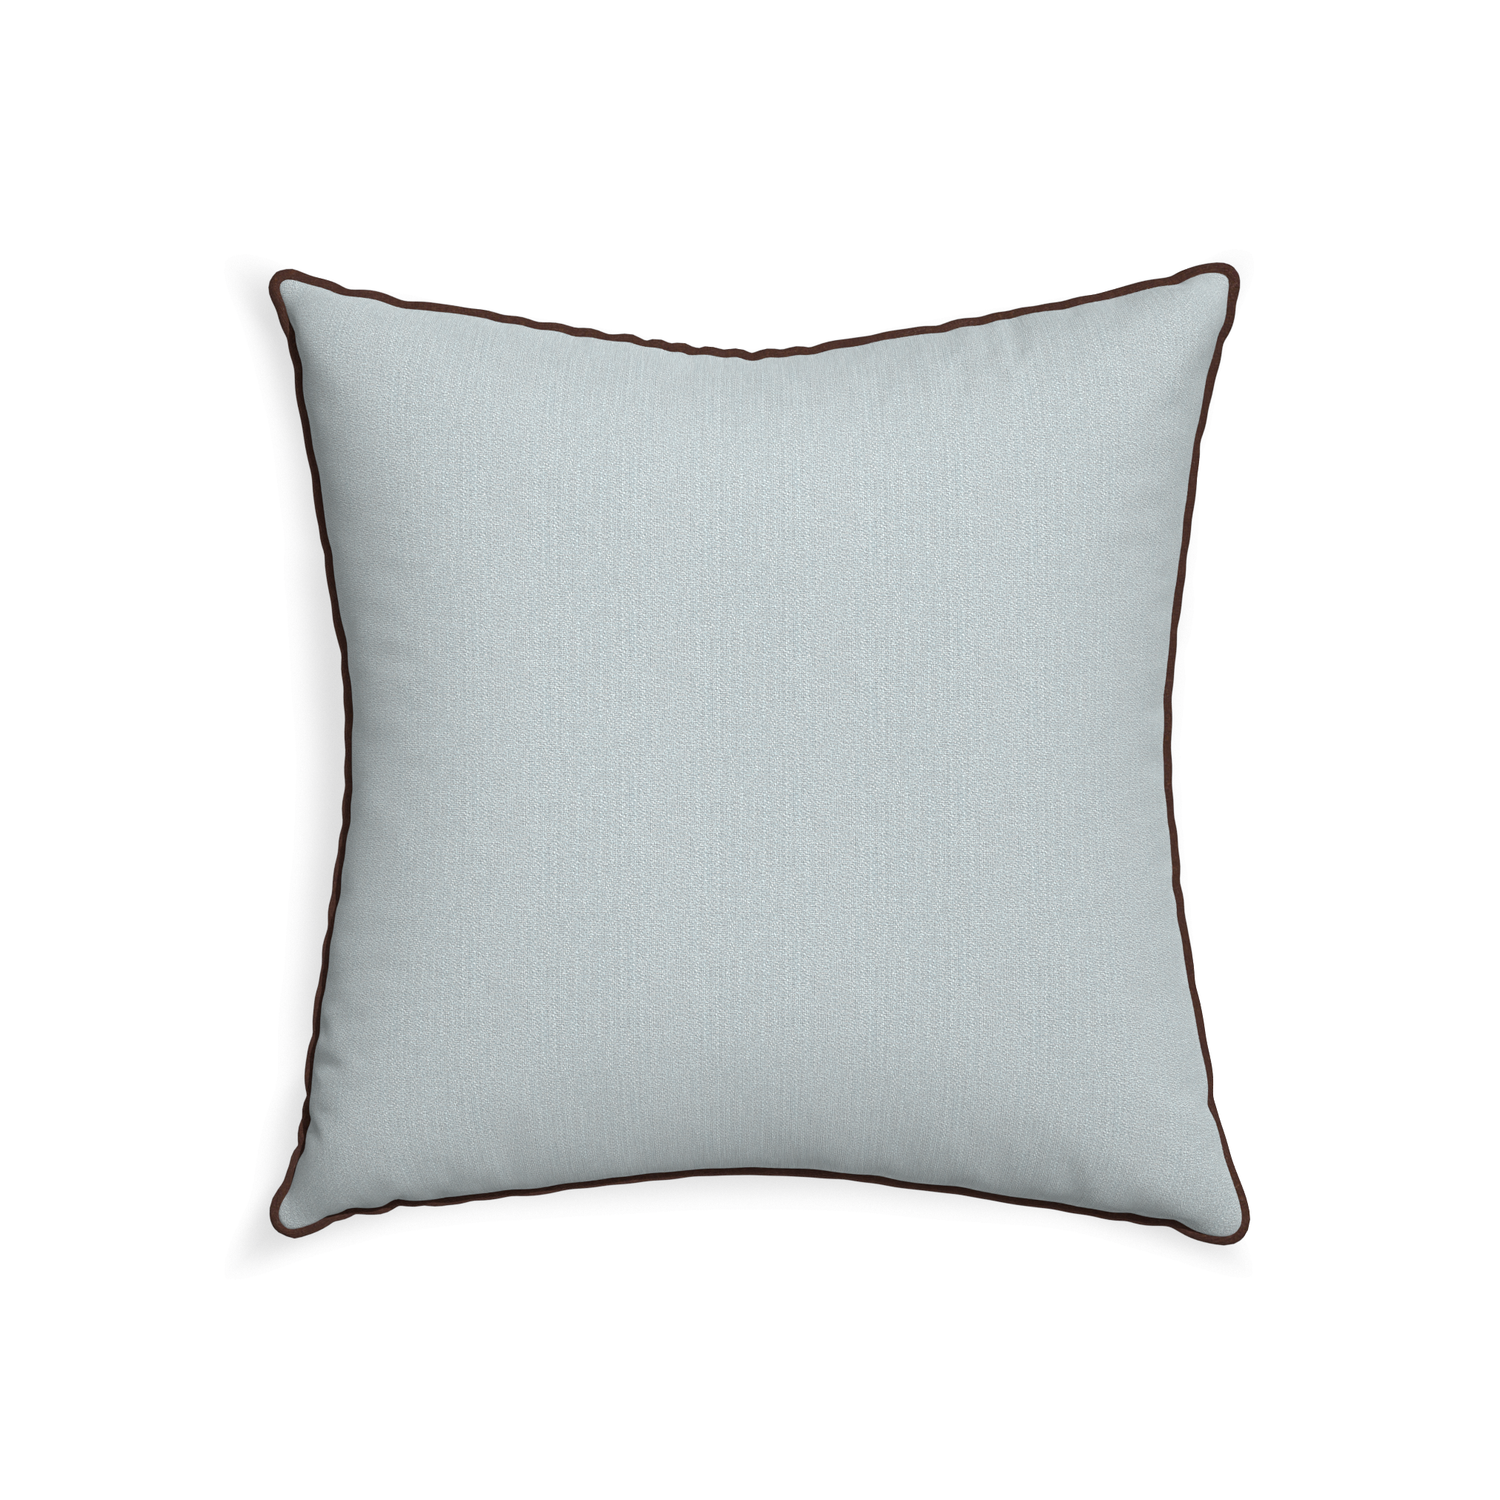 22-square sea custom grey bluepillow with w piping on white background